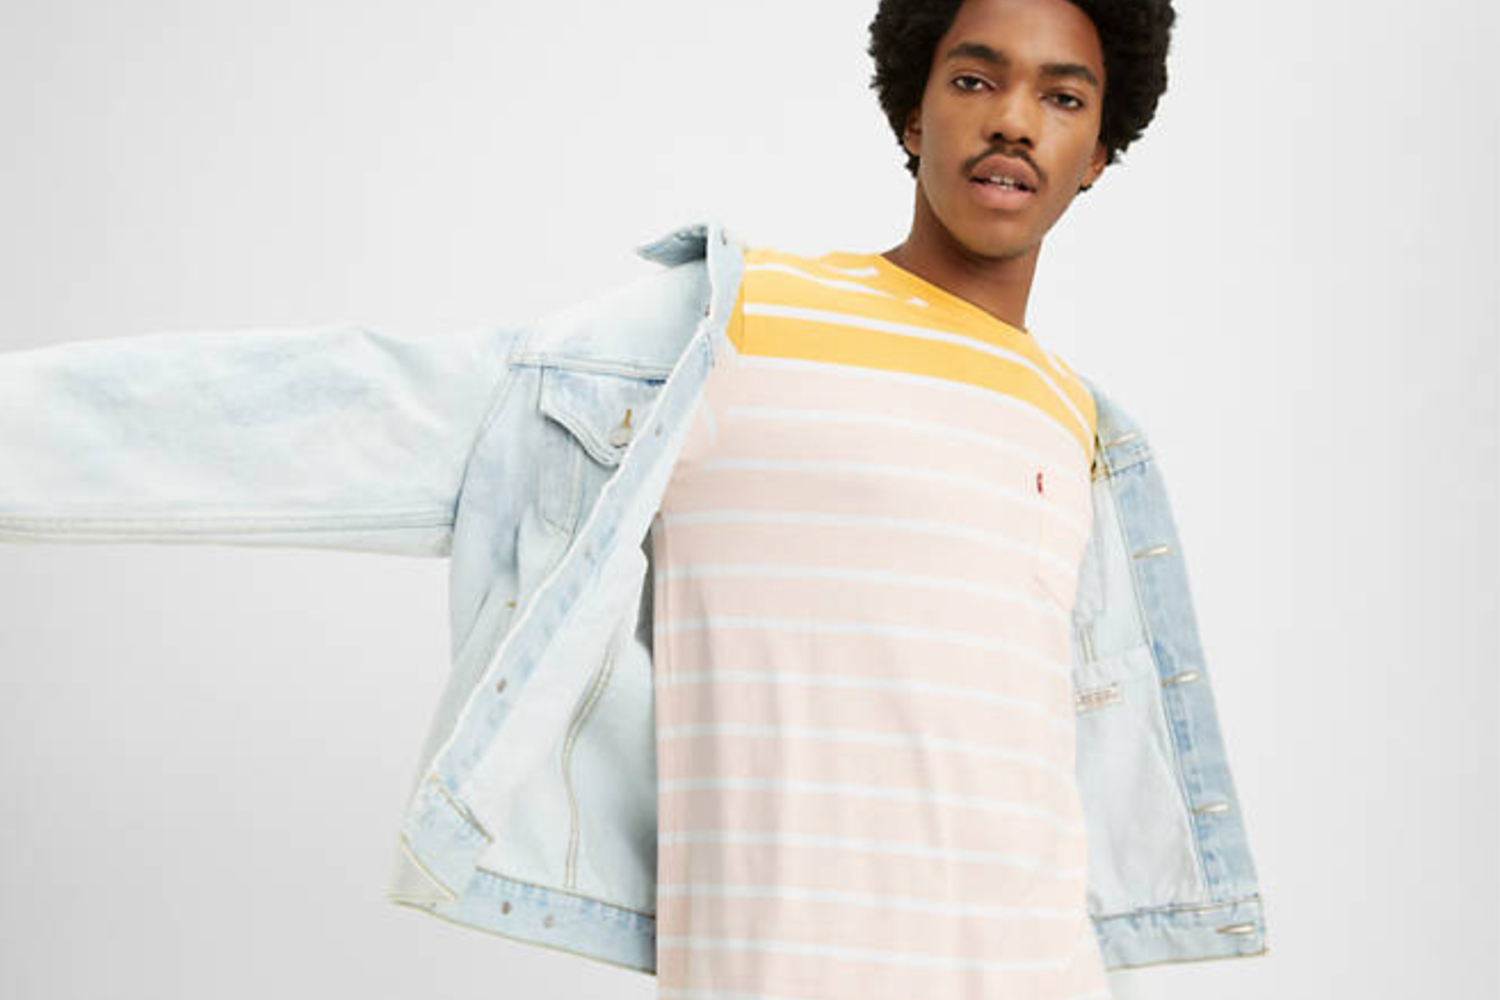 best deal on levis